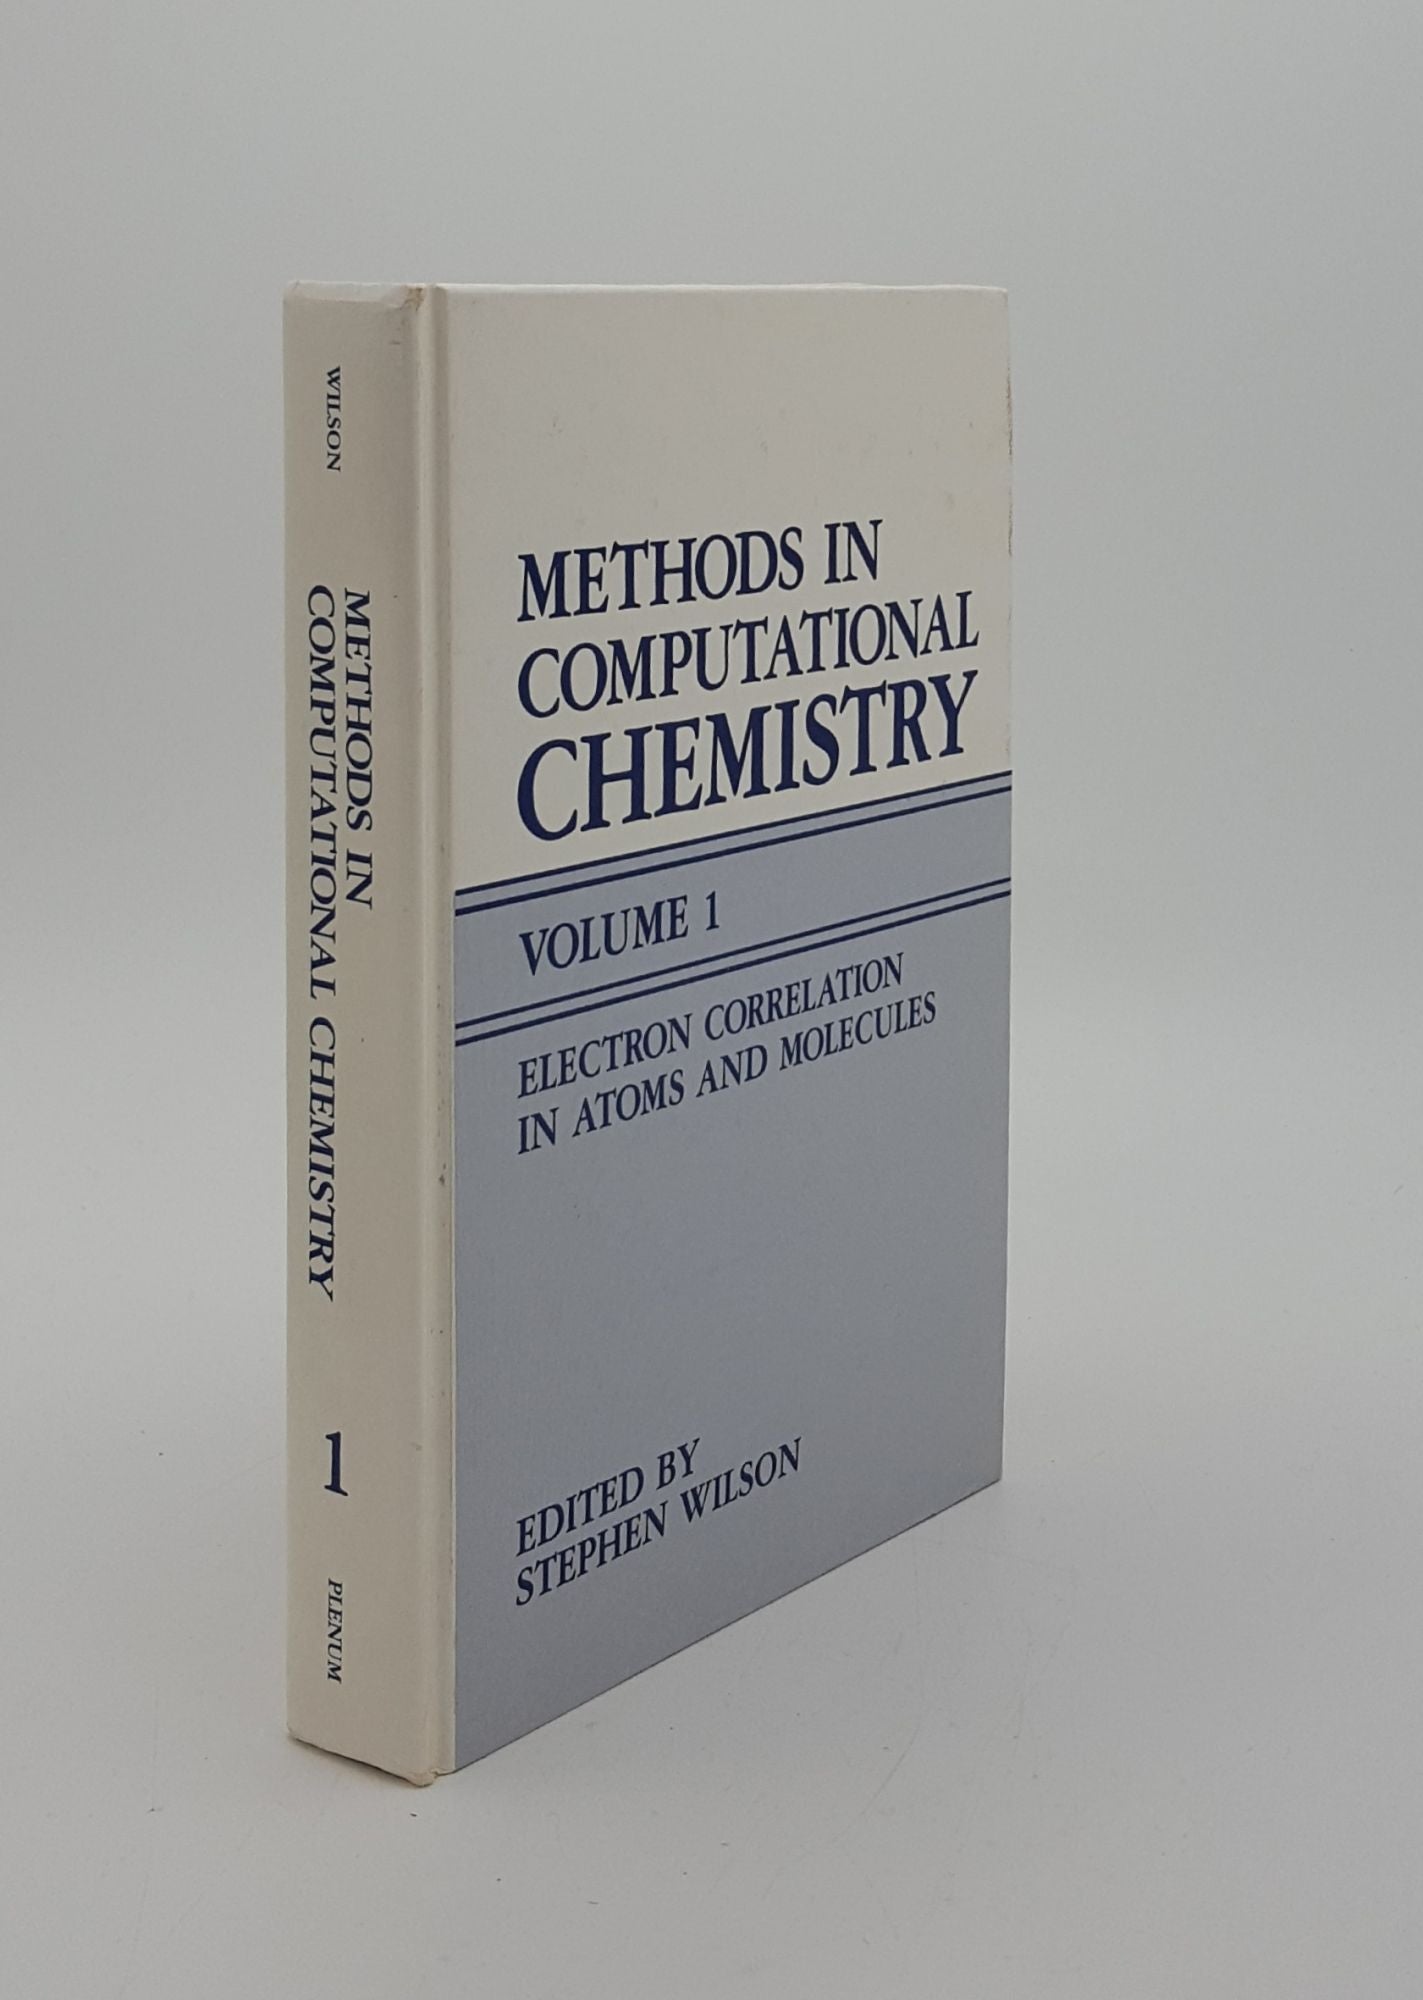 WILSON Stephen - Methods in Computational Chemistry Volume 1 Electron Correlation in Atoms and Molecules